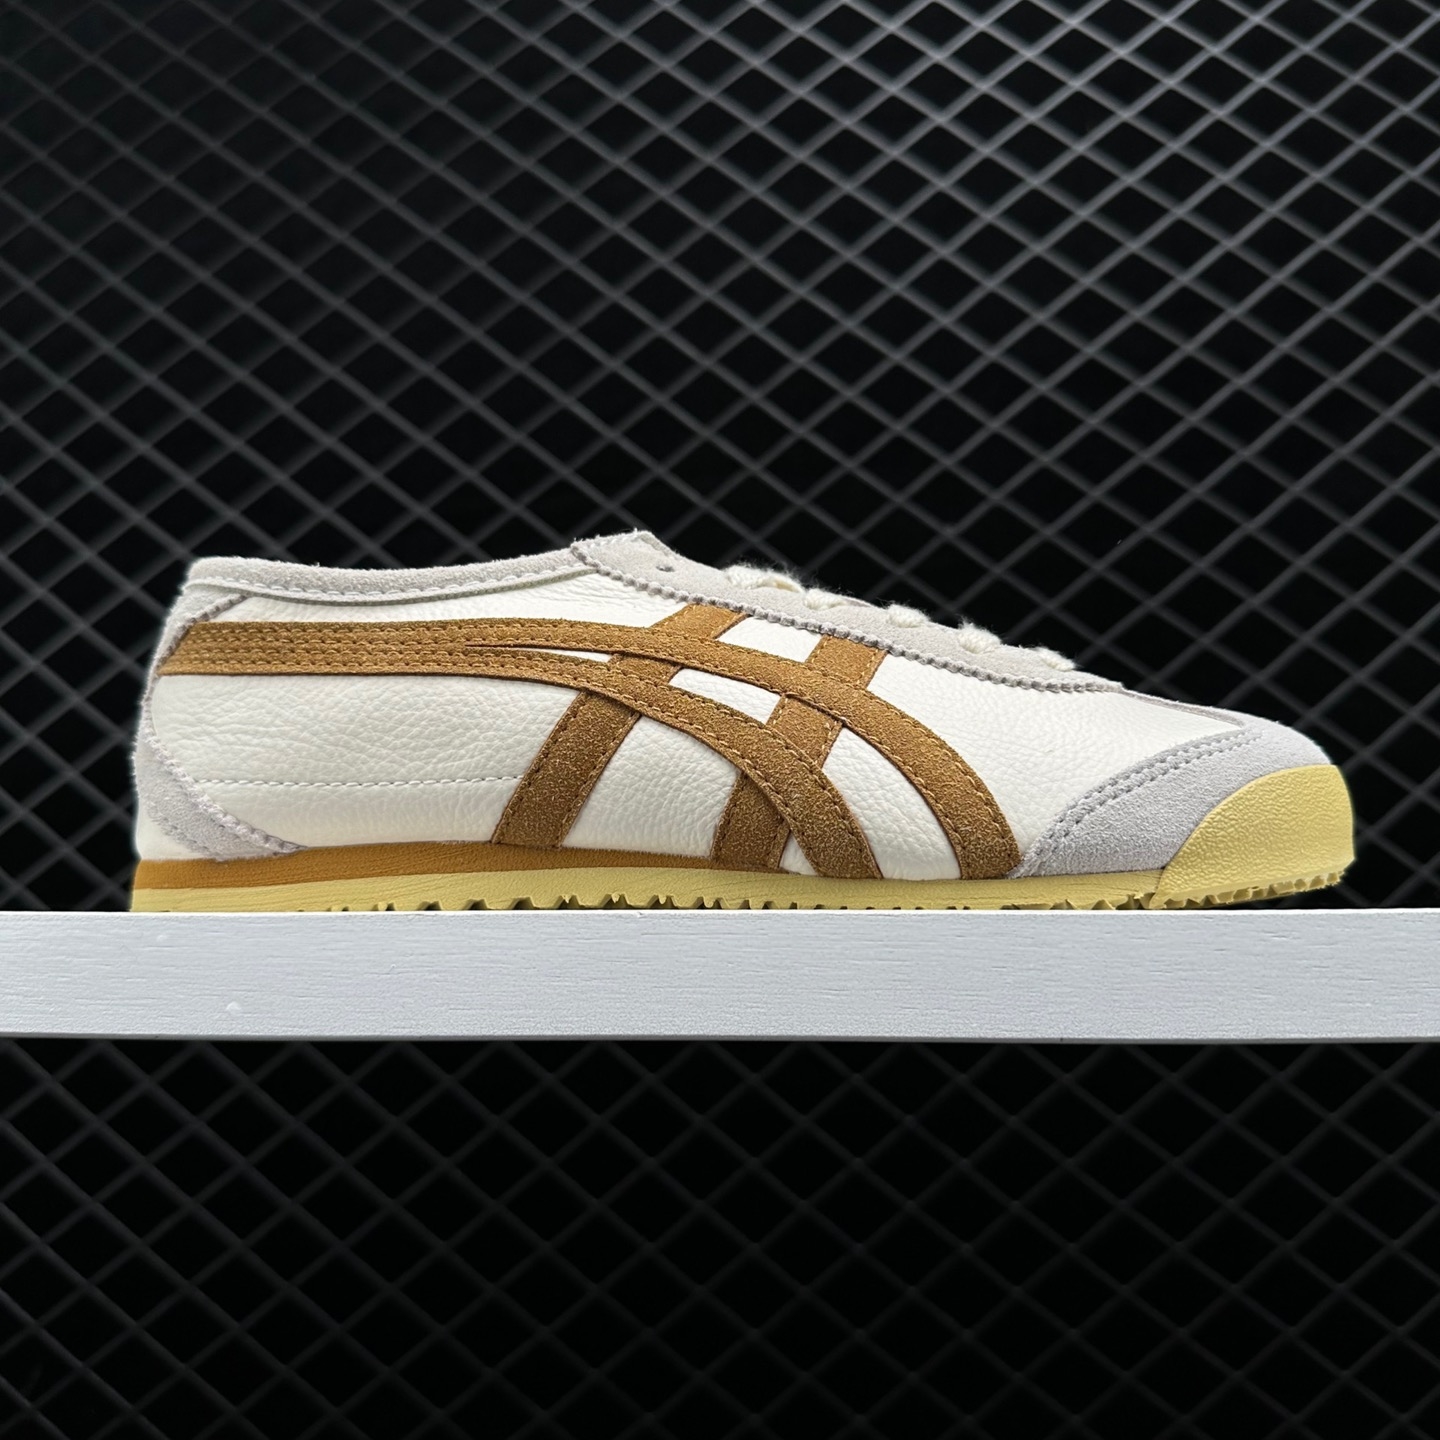 Onitsuka Tiger Mexico 66 White Brown 1183A693-101: Classic Sneakers with a Stylish Twist